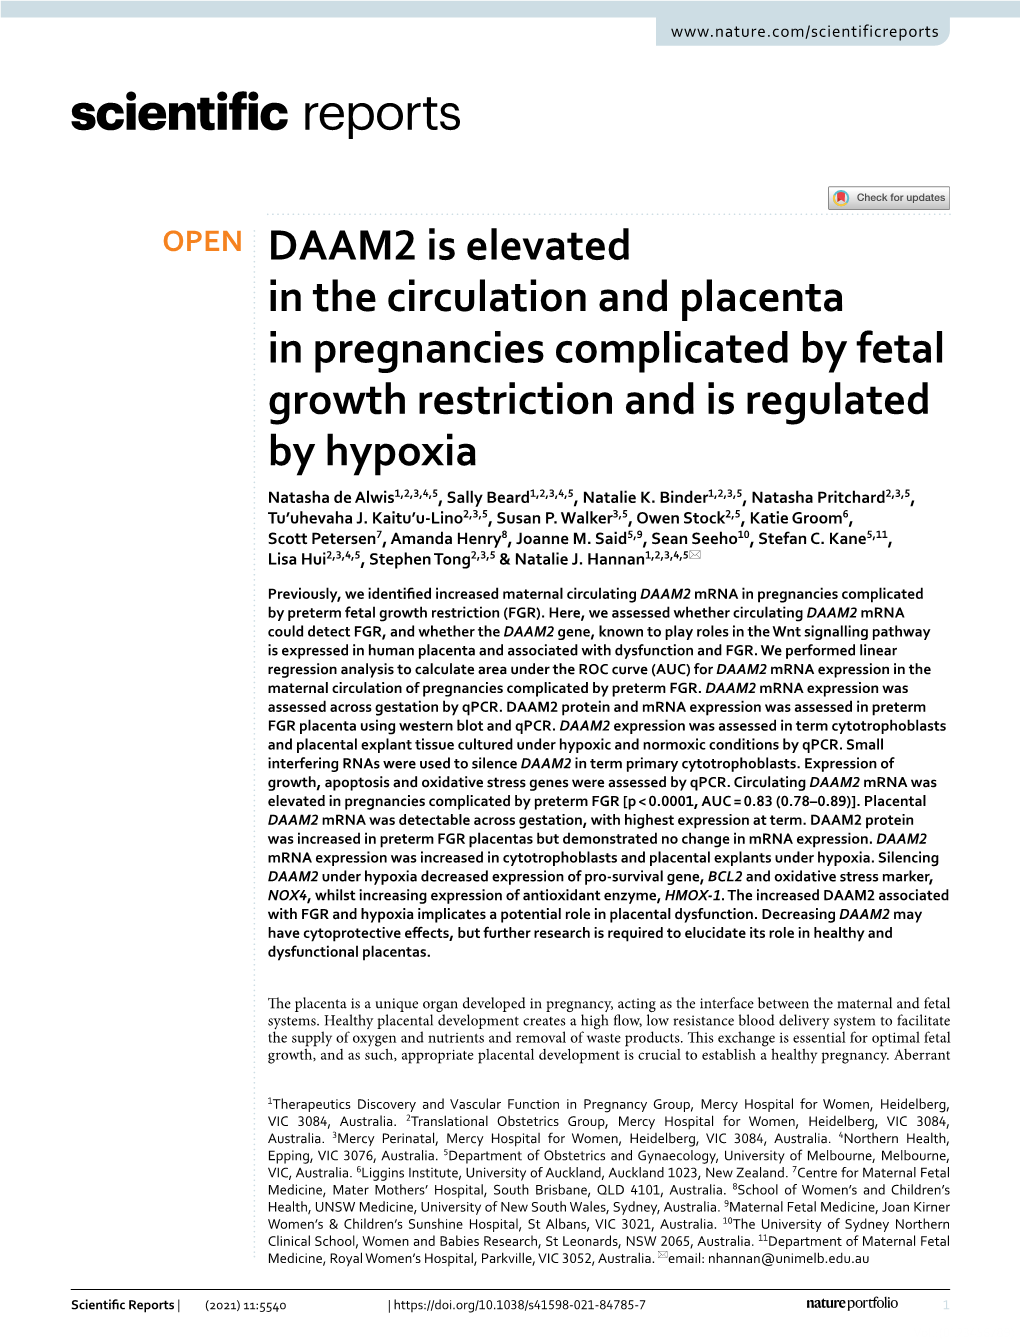 DAAM2 Is Elevated in the Circulation and Placenta in Pregnancies